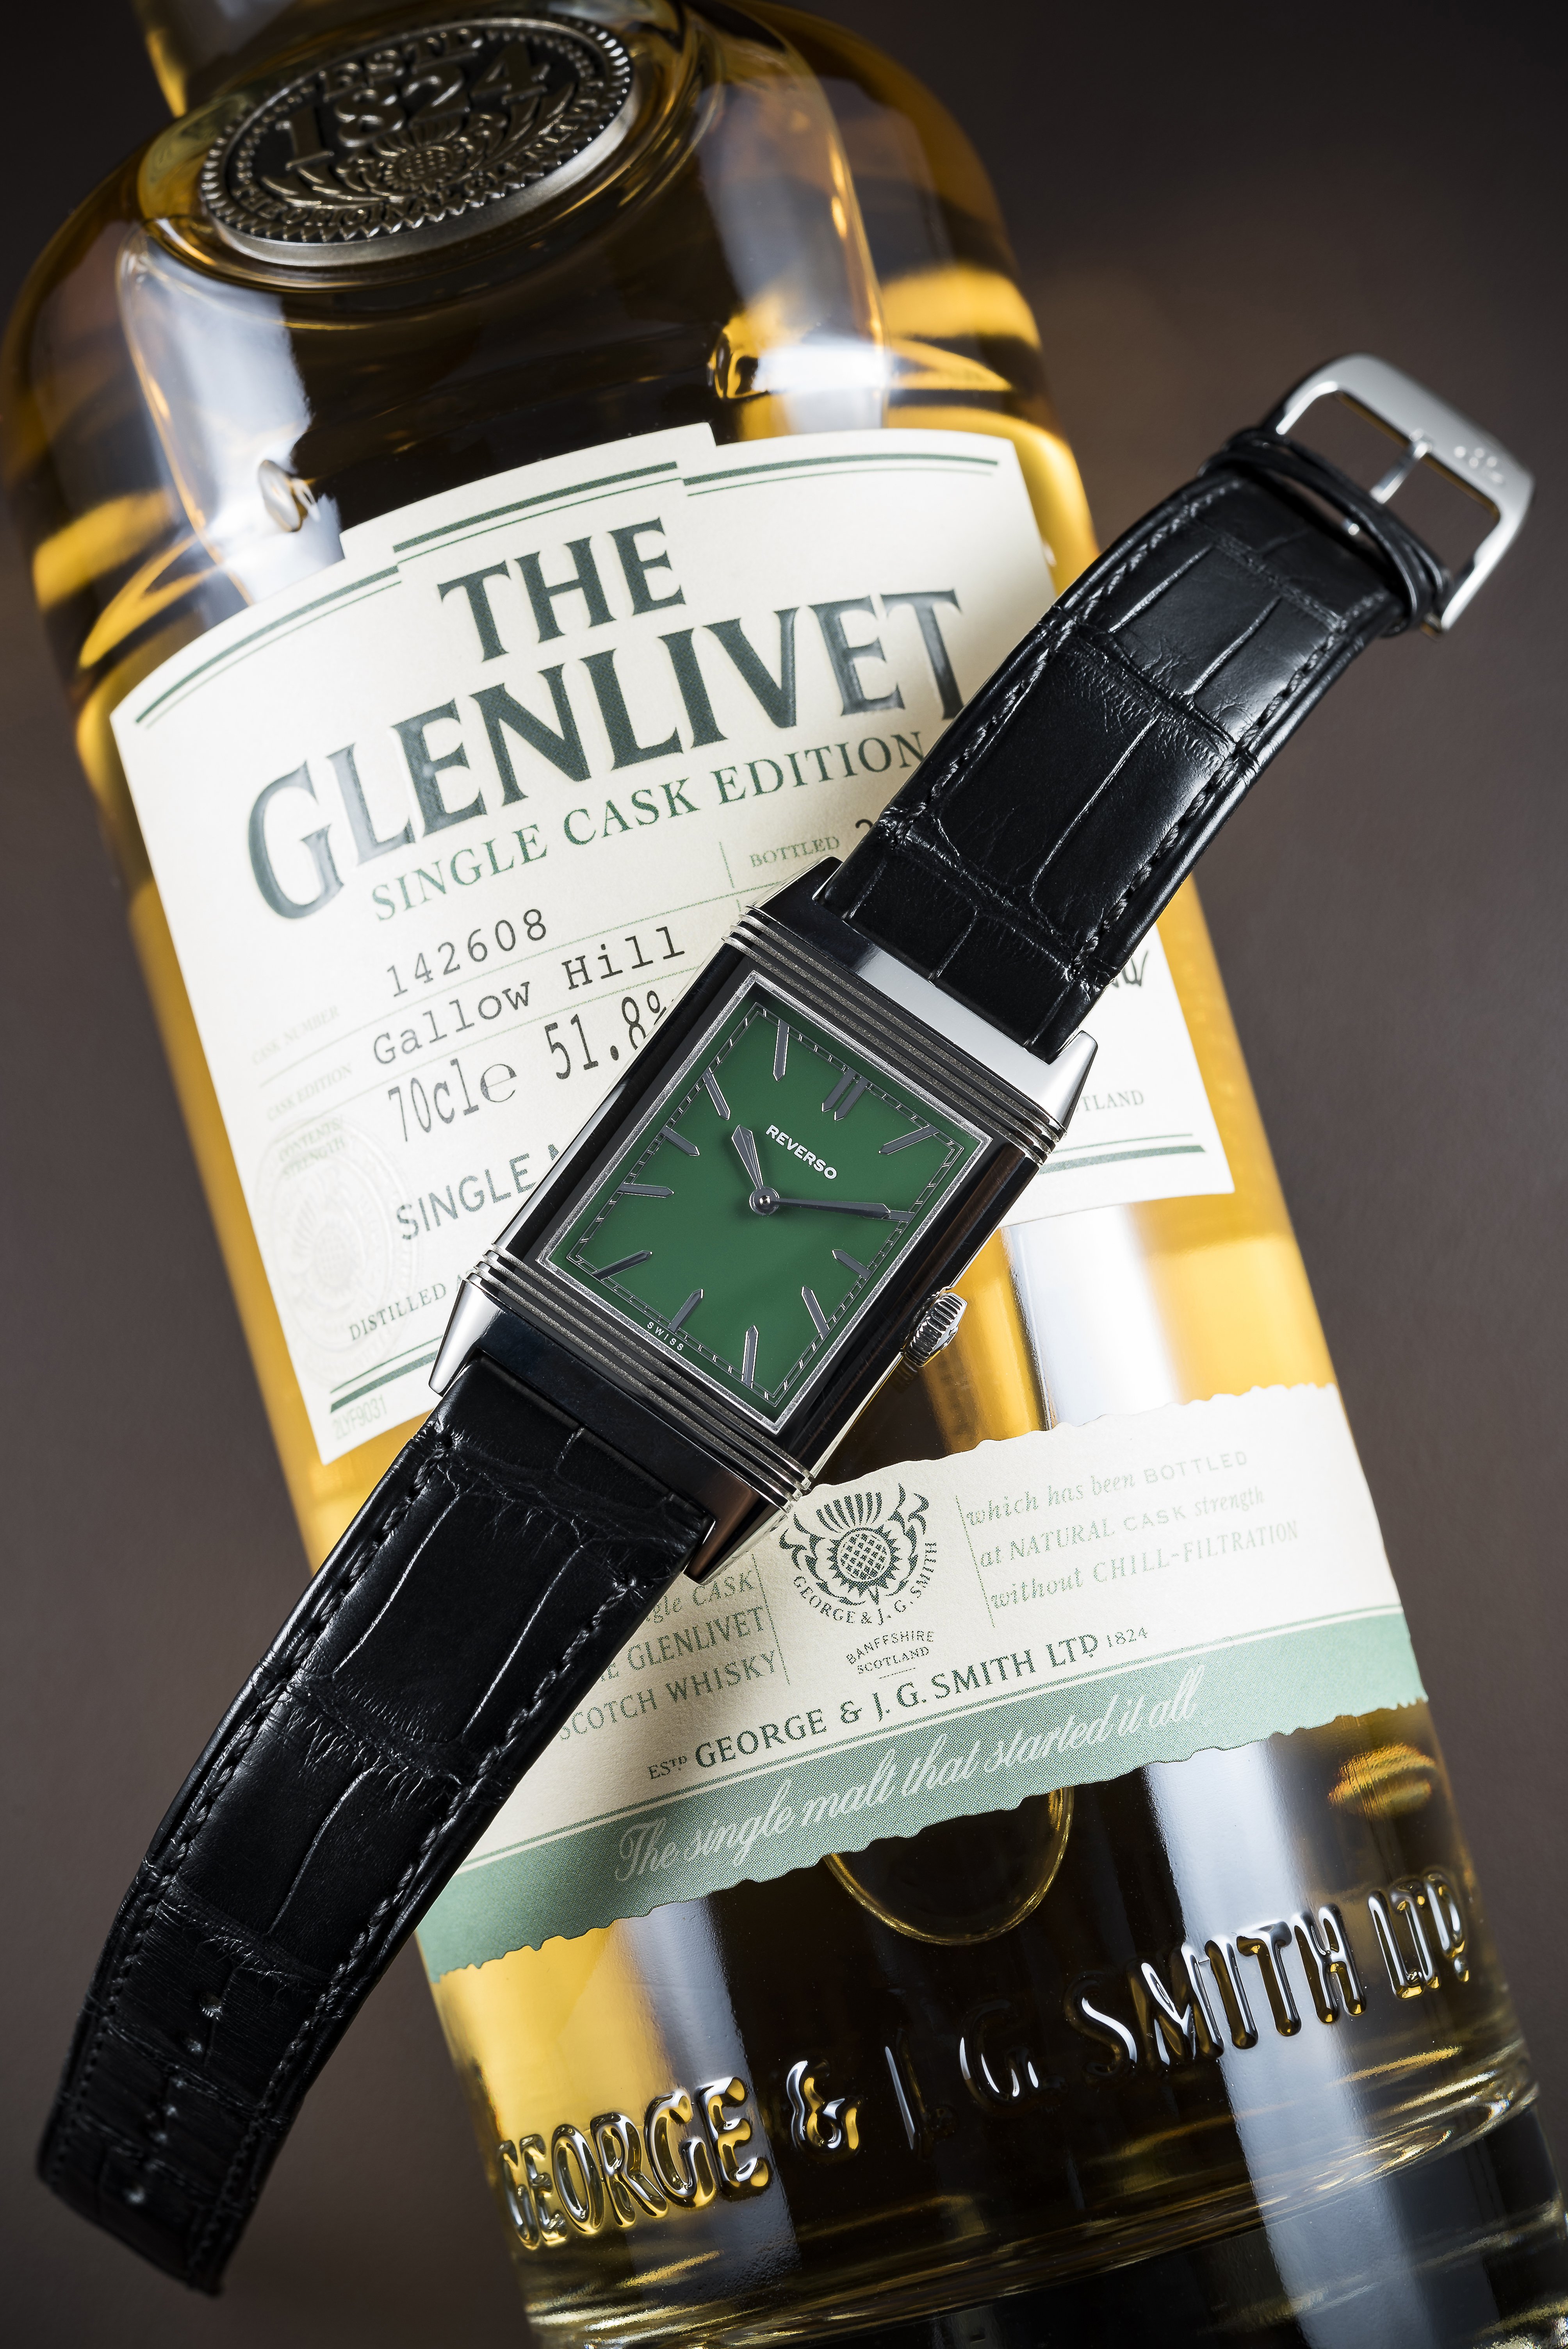 Jaeger-LeCoultre Grande Reverso Ultra-Thin Special London Flagship edition and Glenlivet whisky